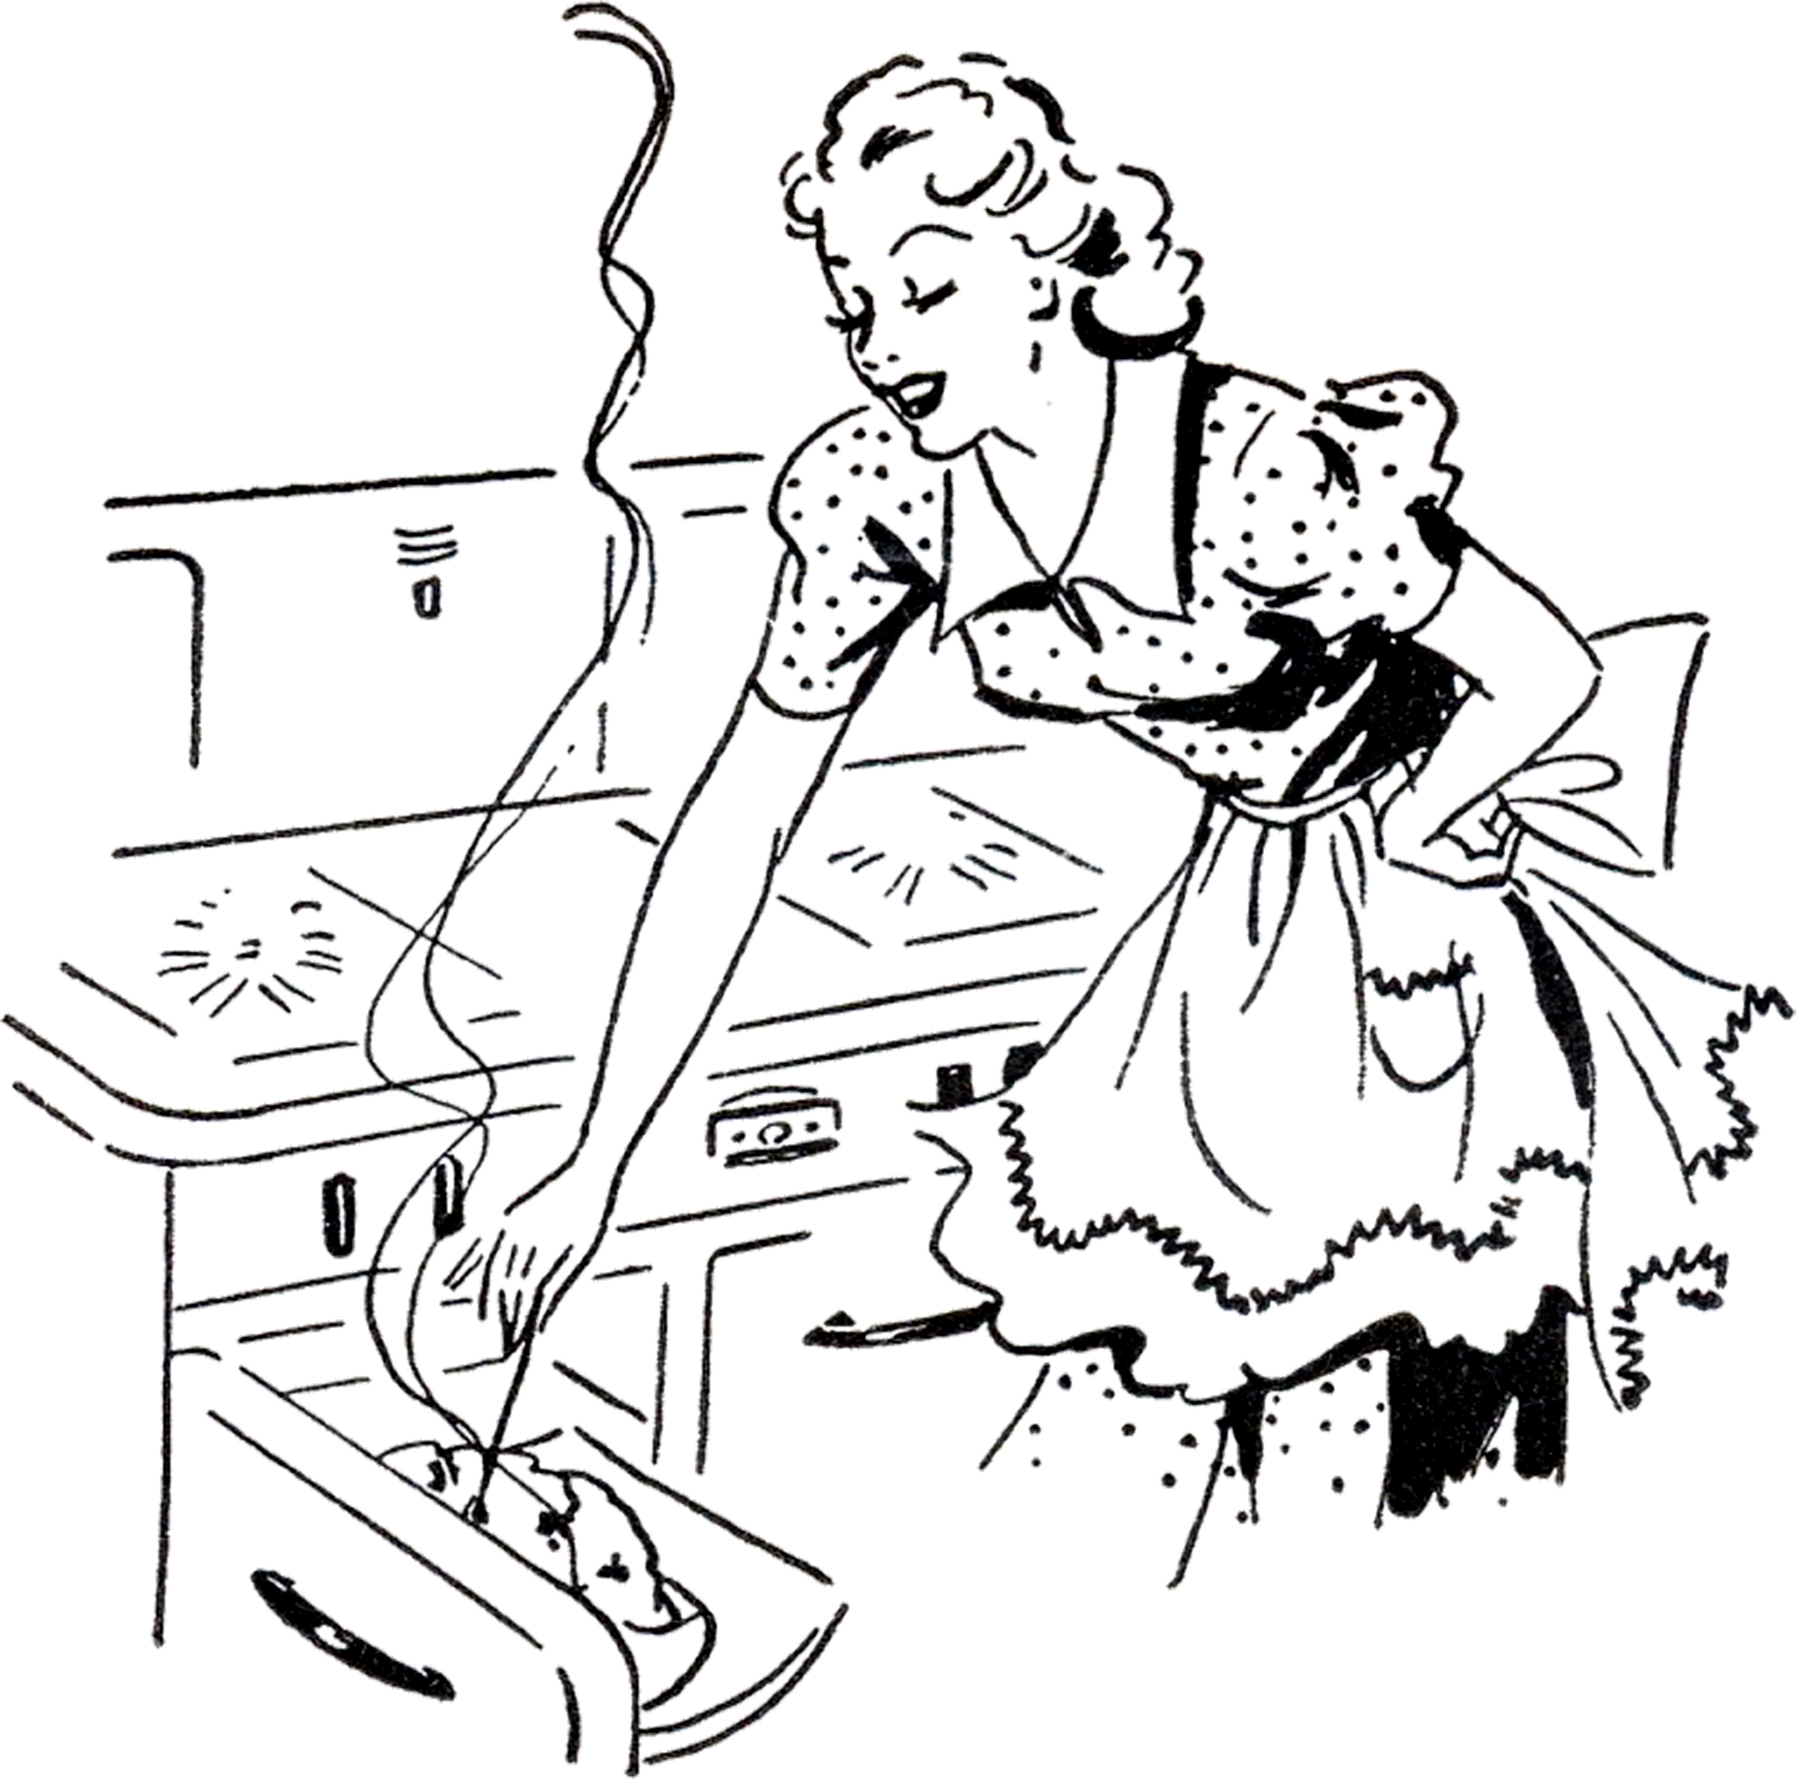 Adorable Retro Cooking Mom Image! - The Graphics Fairy